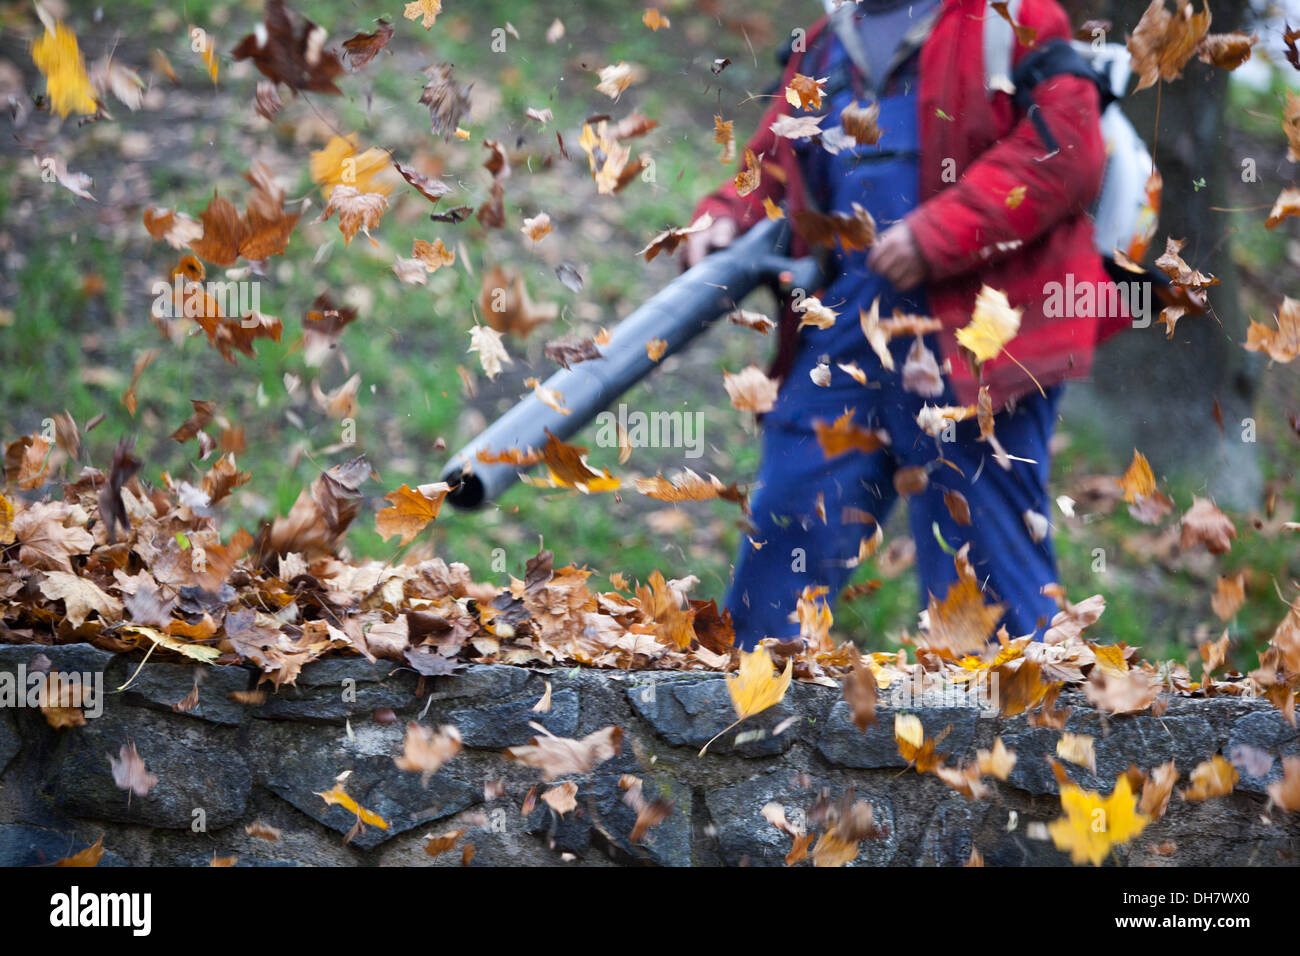 Leaf blower blow out the leaves of the garden lawn, Tools for cleaning autumn fallen leaves Stock Photo